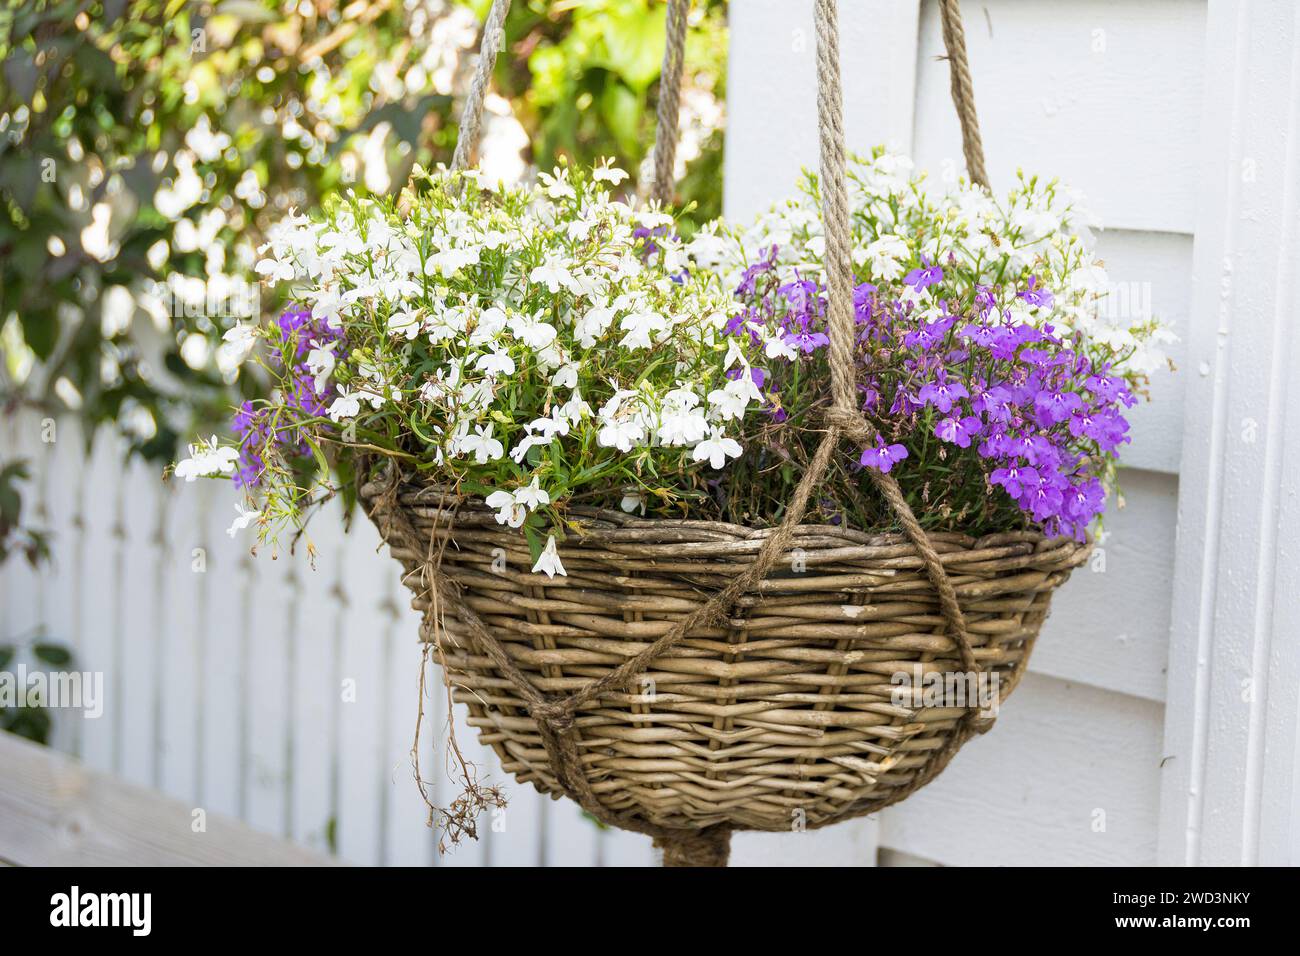 White and purple aubretia plant in a hanging basket outside a house. Stock Photo